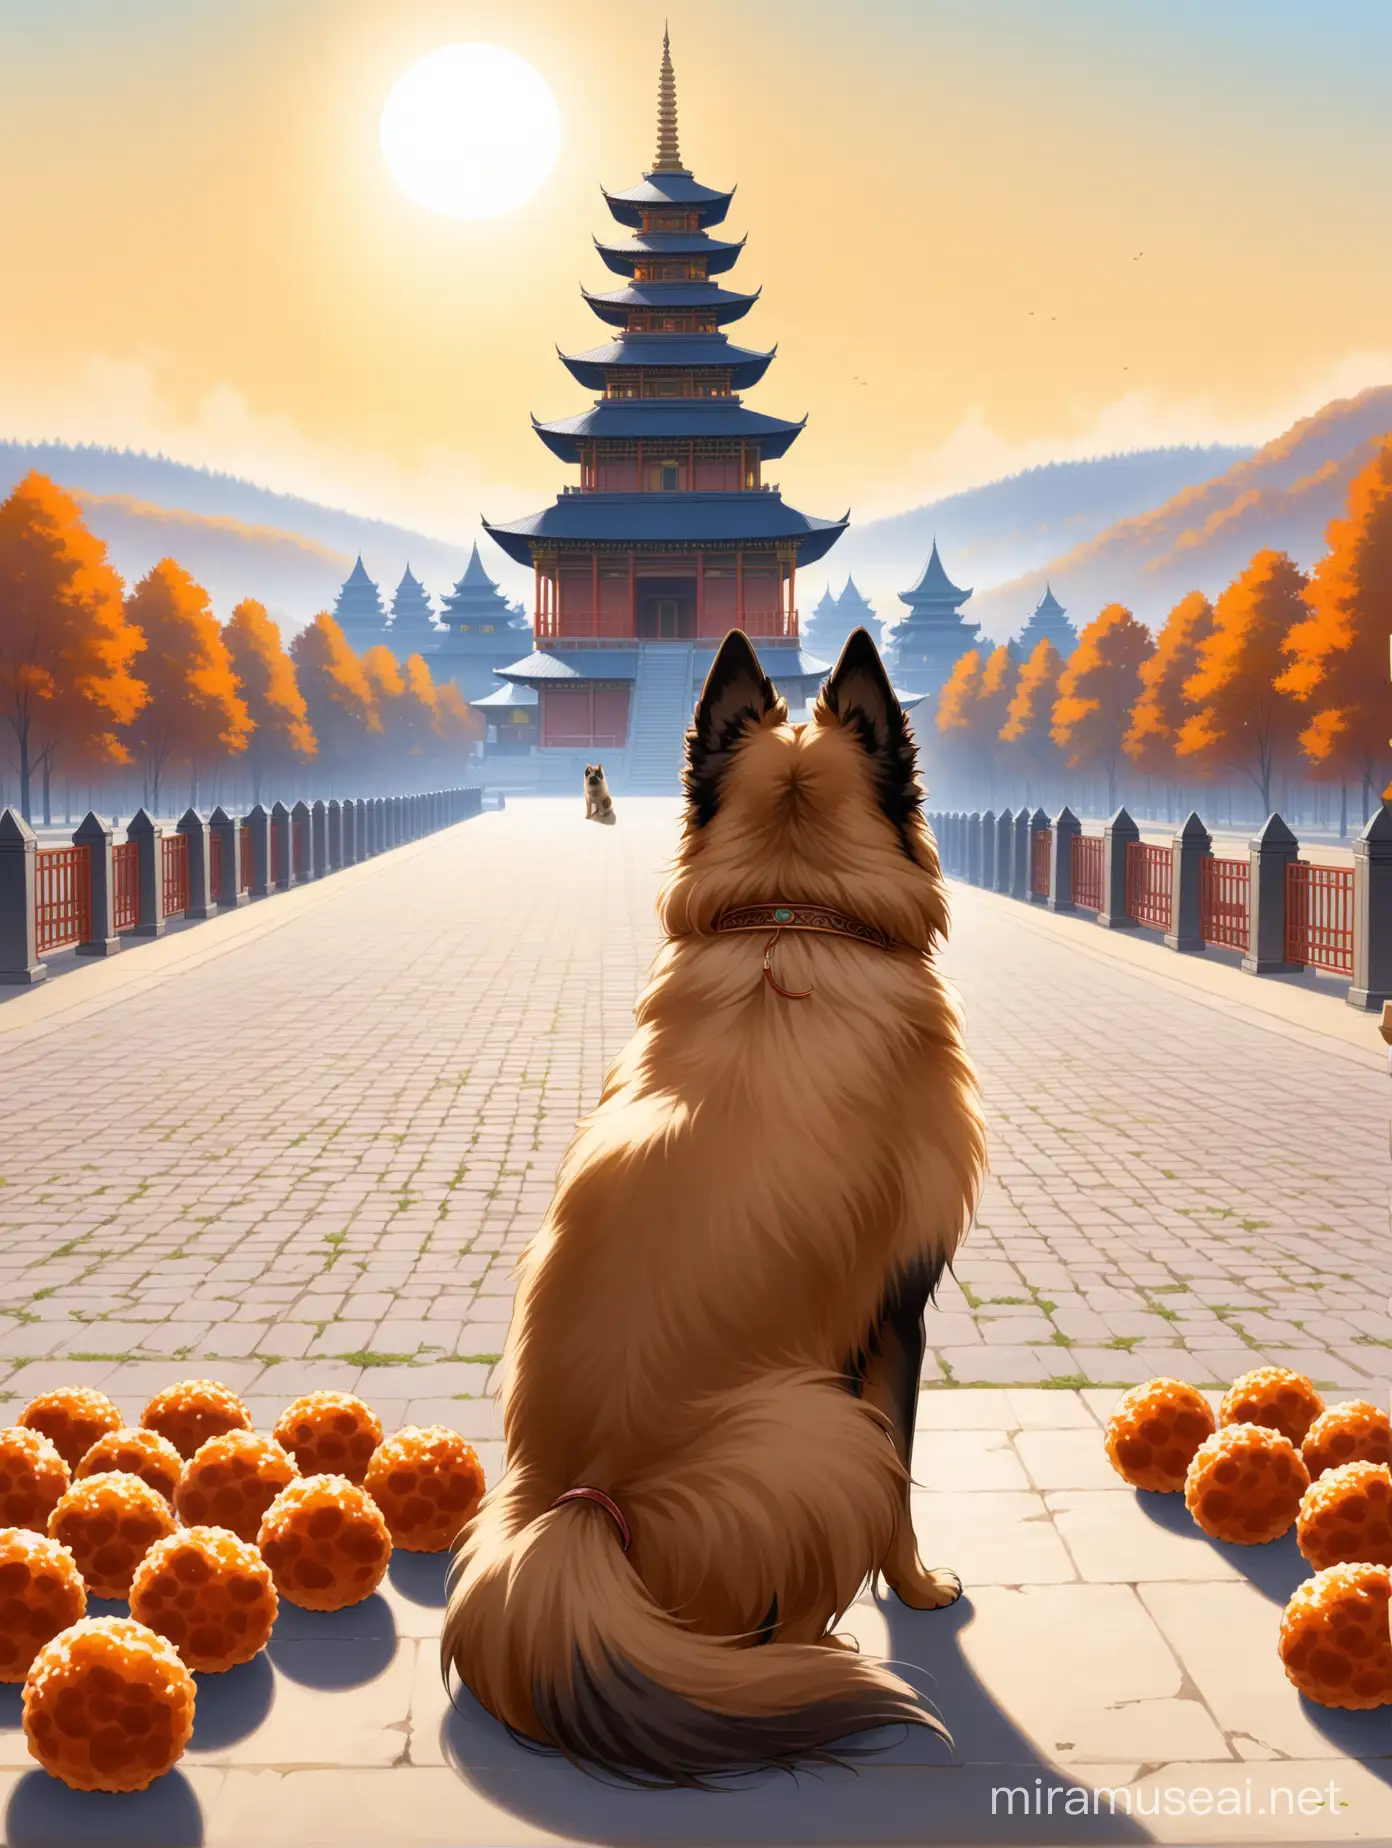 A  Belgian Tervuren dog looks at a temple in the distance. the temple is surrounded by meatballs